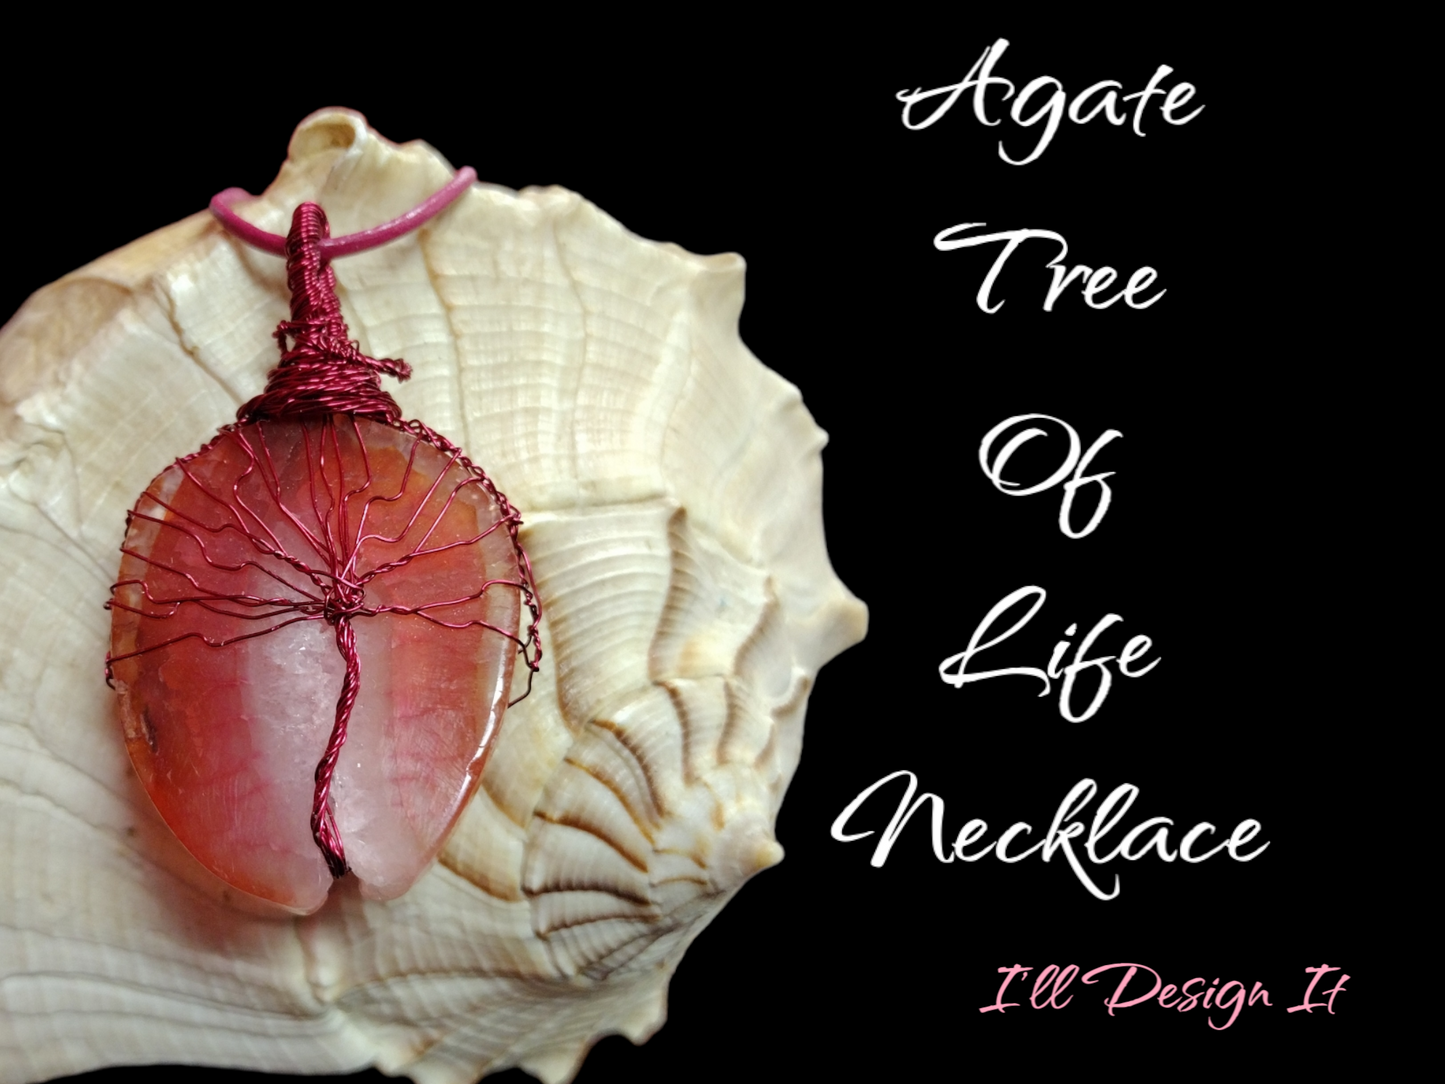 Agate Tree of life necklace